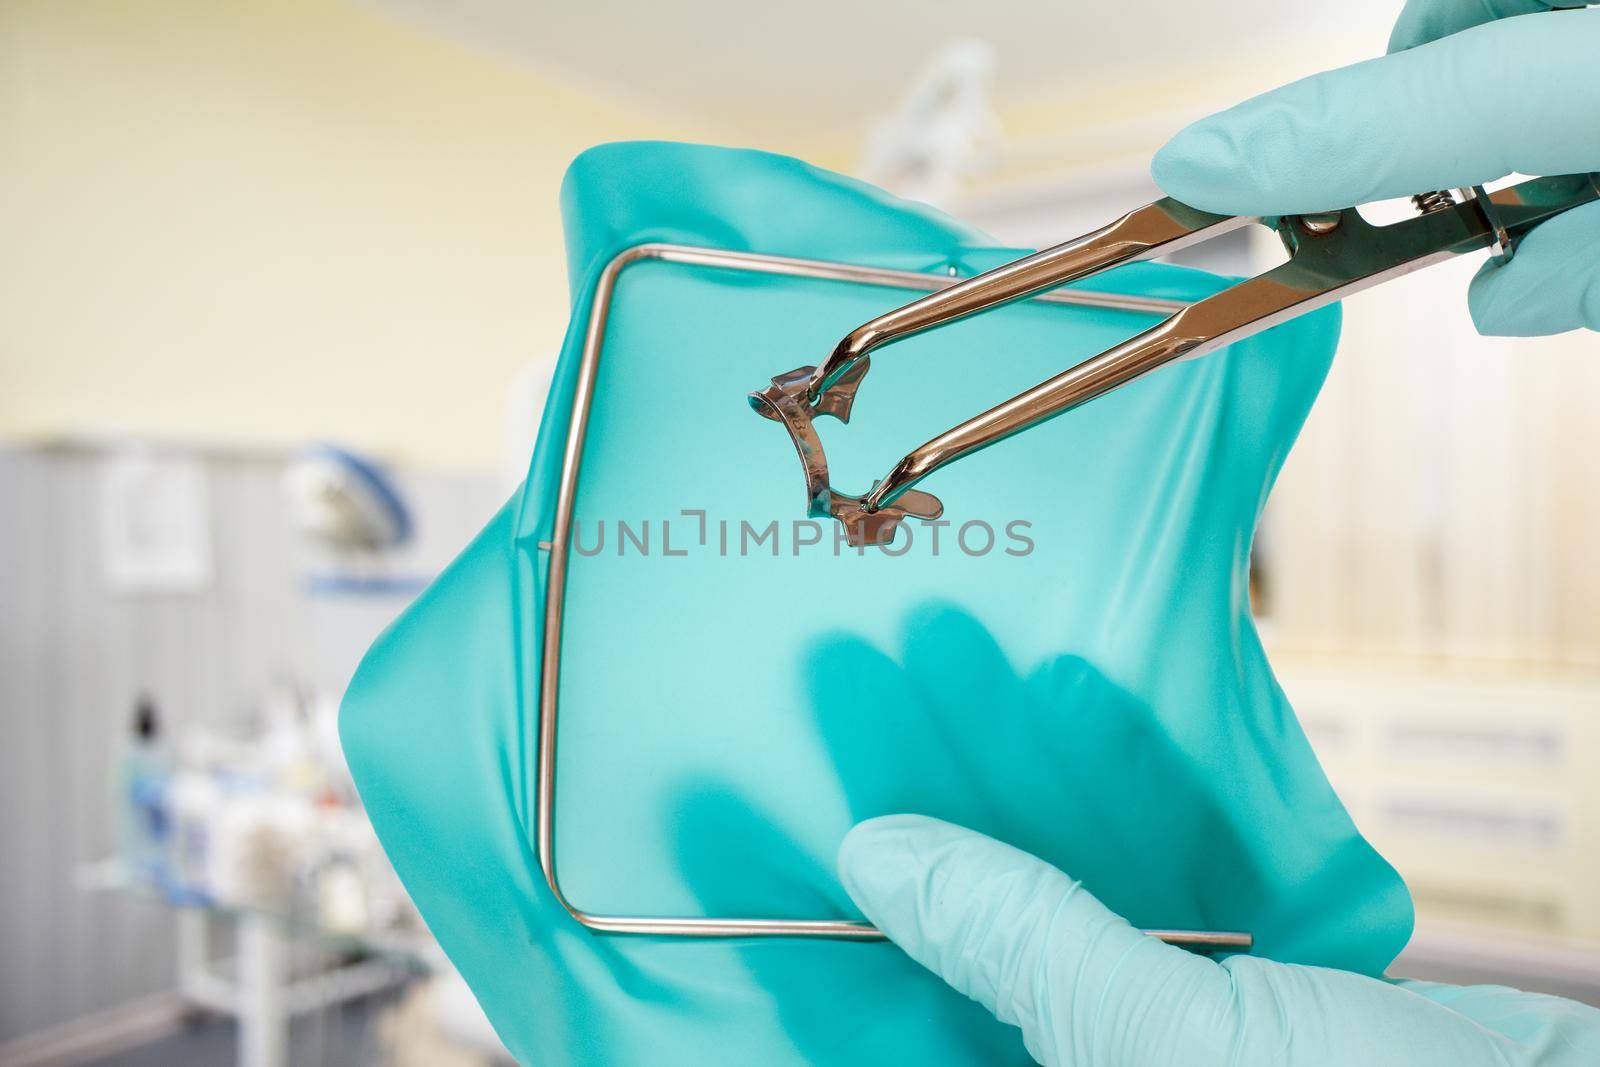 Dentist's hands in latex gloves with a rubber dam clamp forceps, a rubber dam and a metal frame with a detal clinic on the background. Medical tools concept.